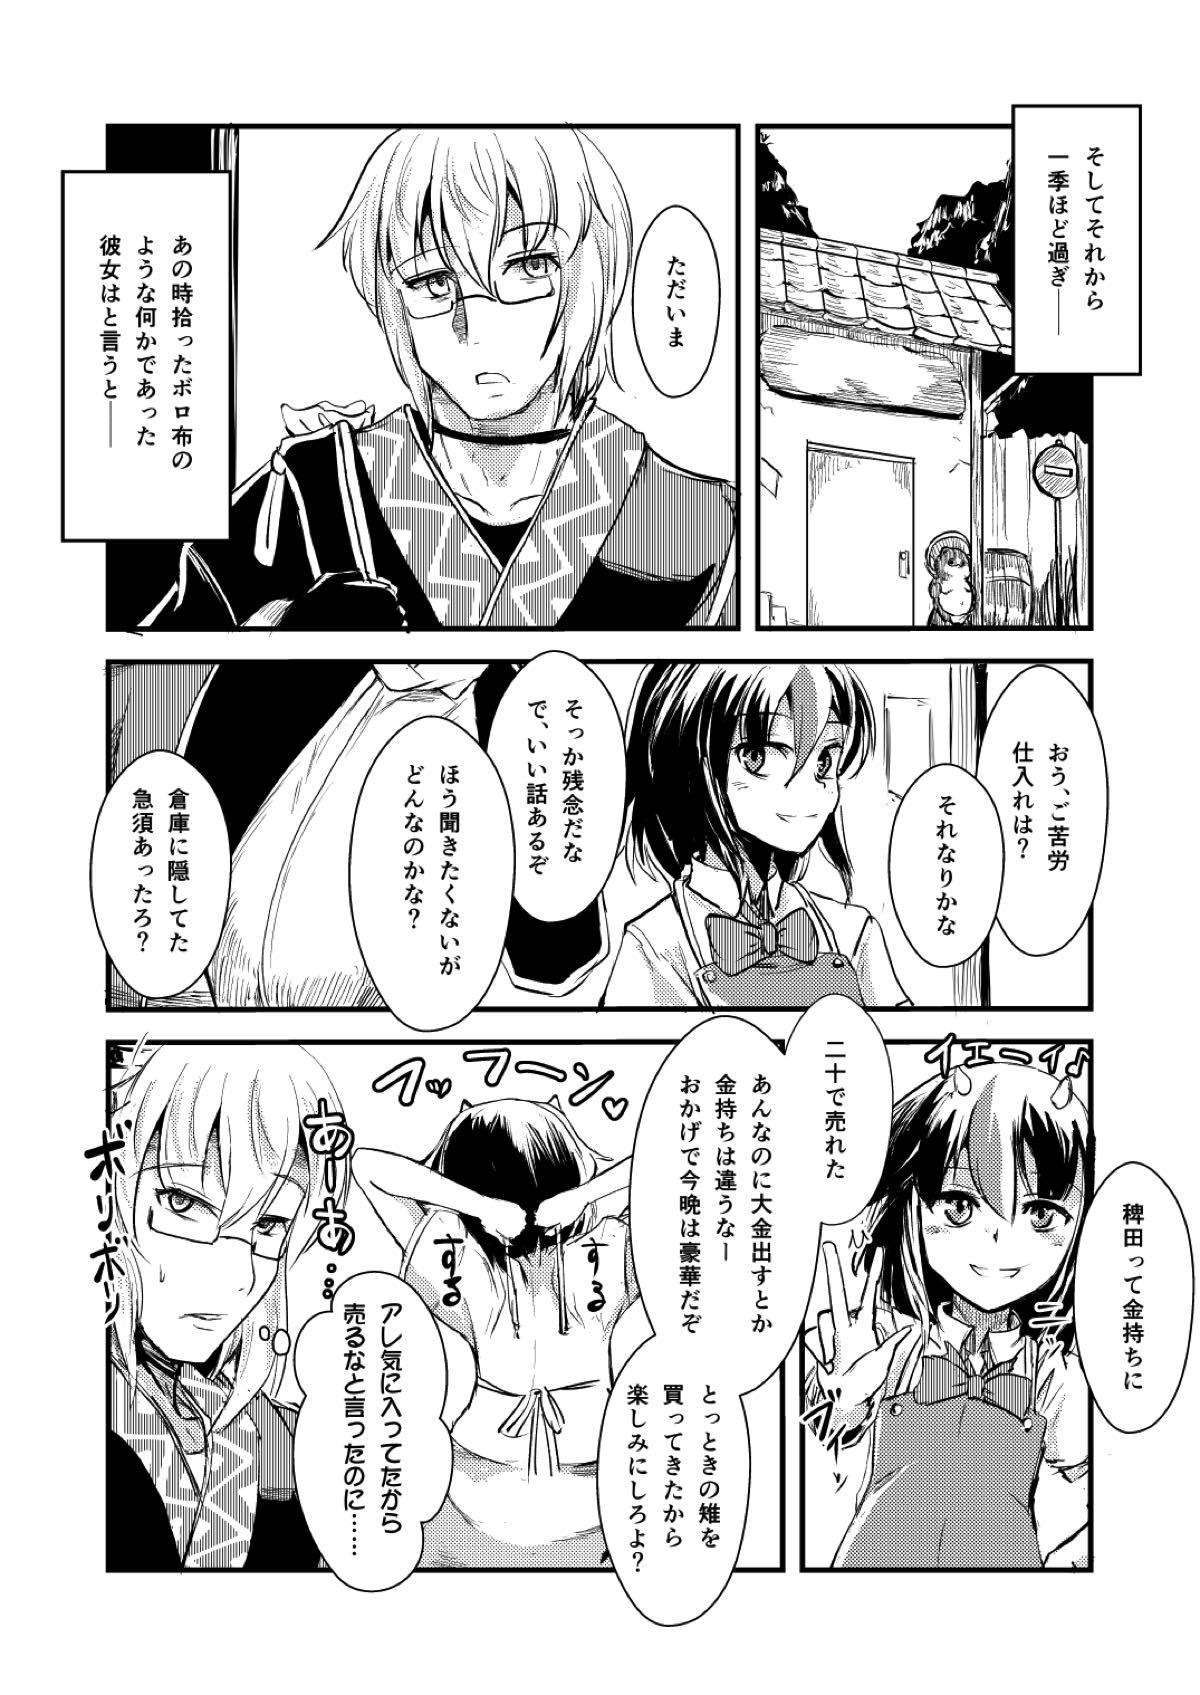 Stepsiblings Yakkaimono no Serenade - Touhou project Stepbrother - Page 3